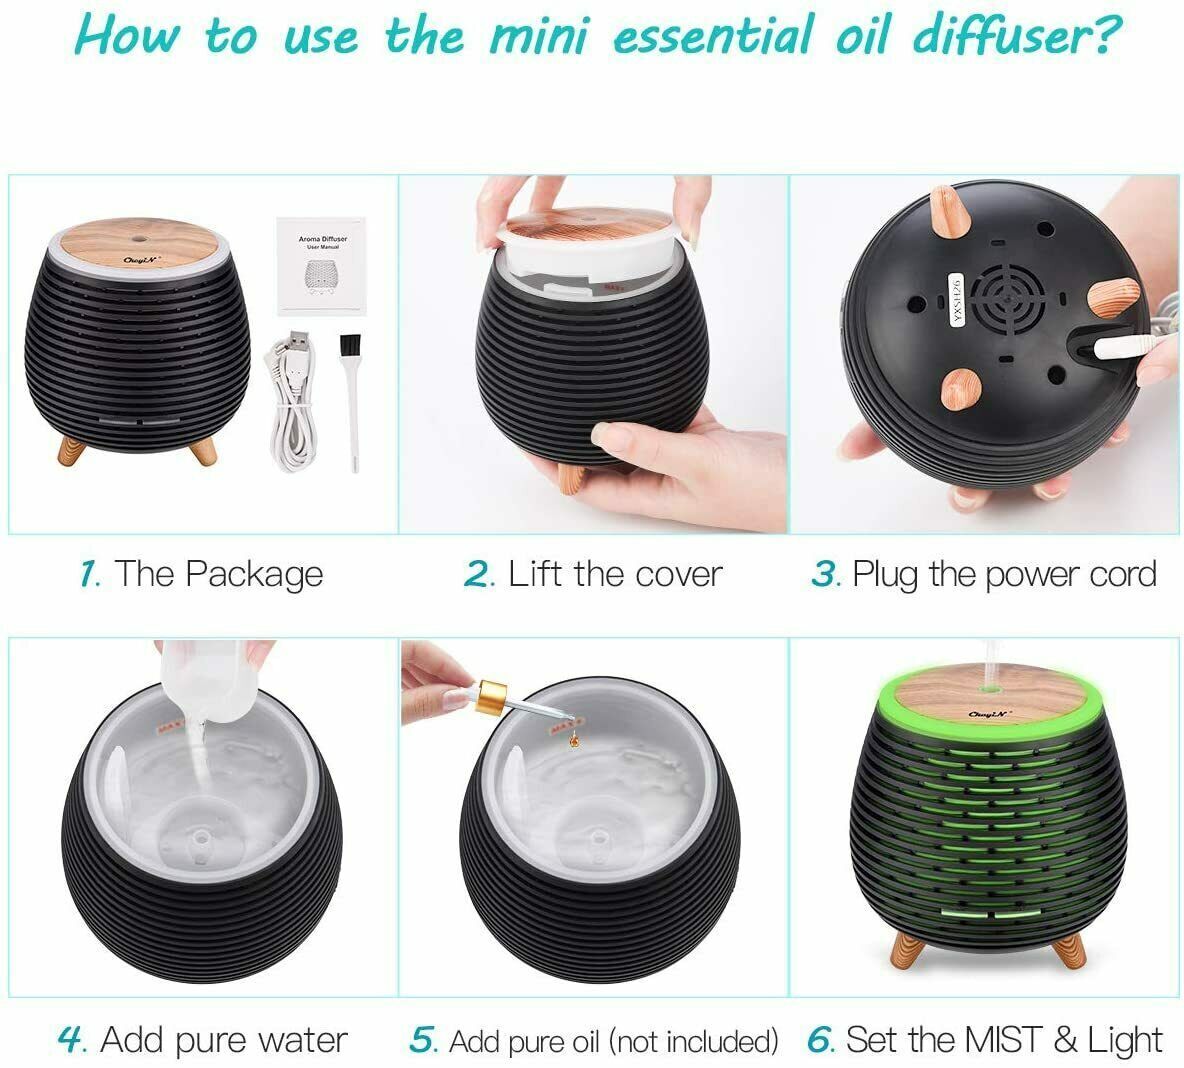 Step-by-step instructions for using a Mini Oil Diffuser SpyCam, including contents of the package and operating procedures.